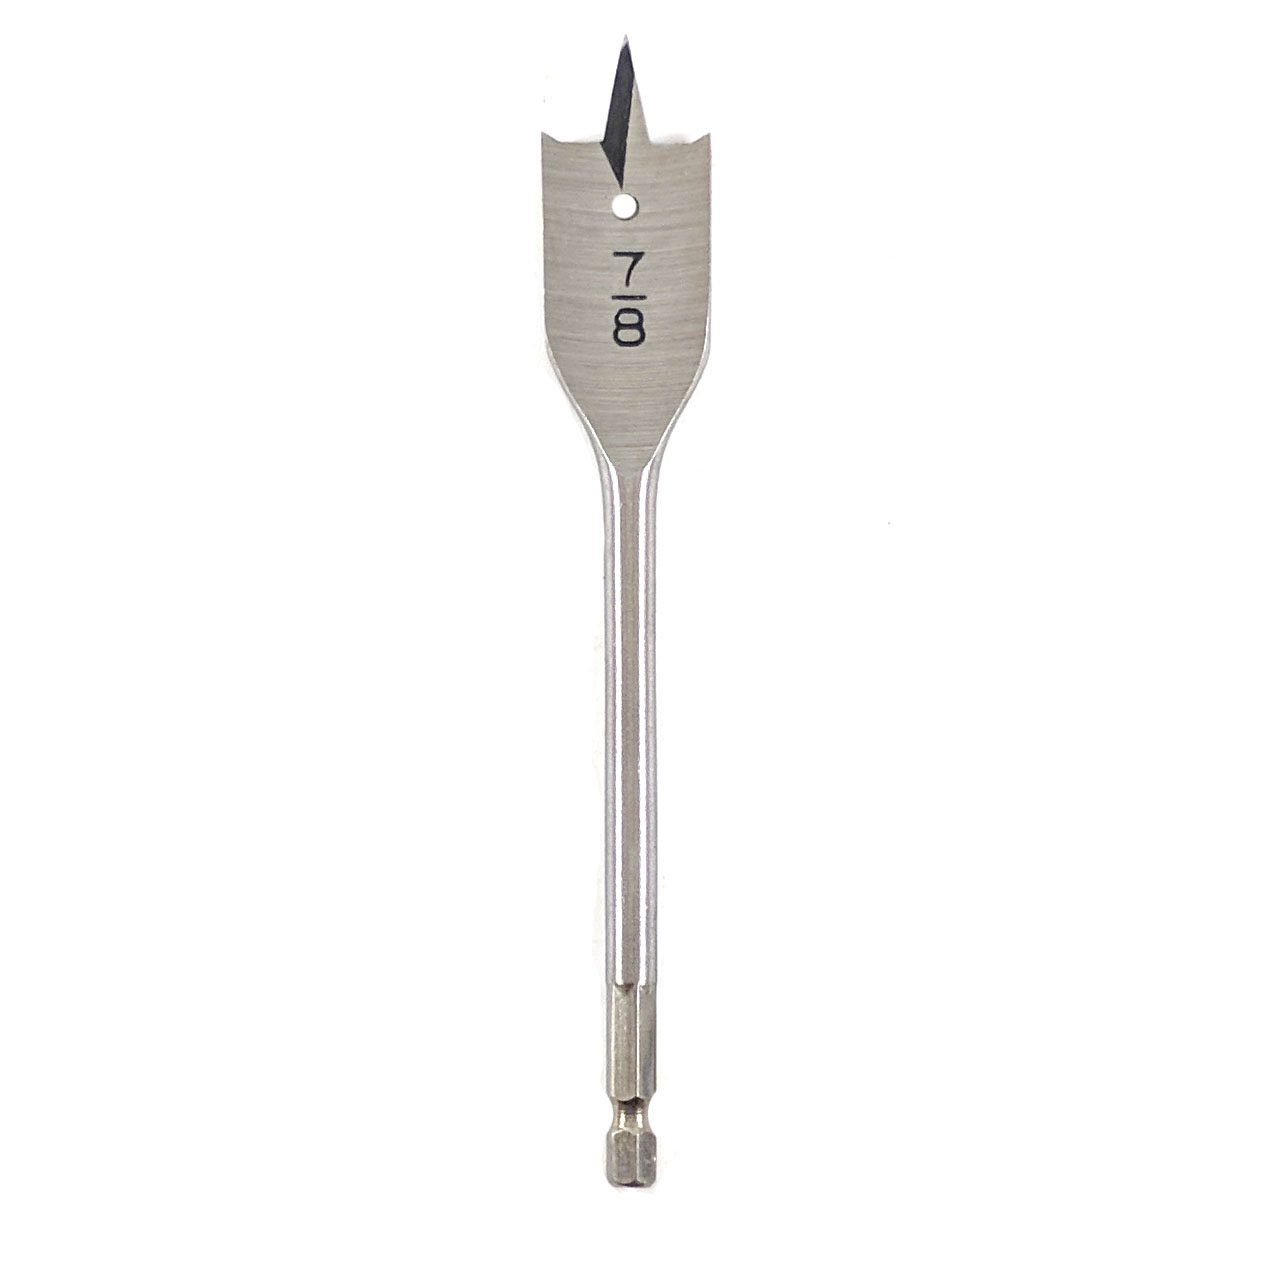 KEO 17410 Cobalt Steel Type B Combined Drill and Countersink Bright Uncoated 10.00mm Body Diameter 60 Degree Point Angle 2.50mm Point Diameter Finish Round Shank 